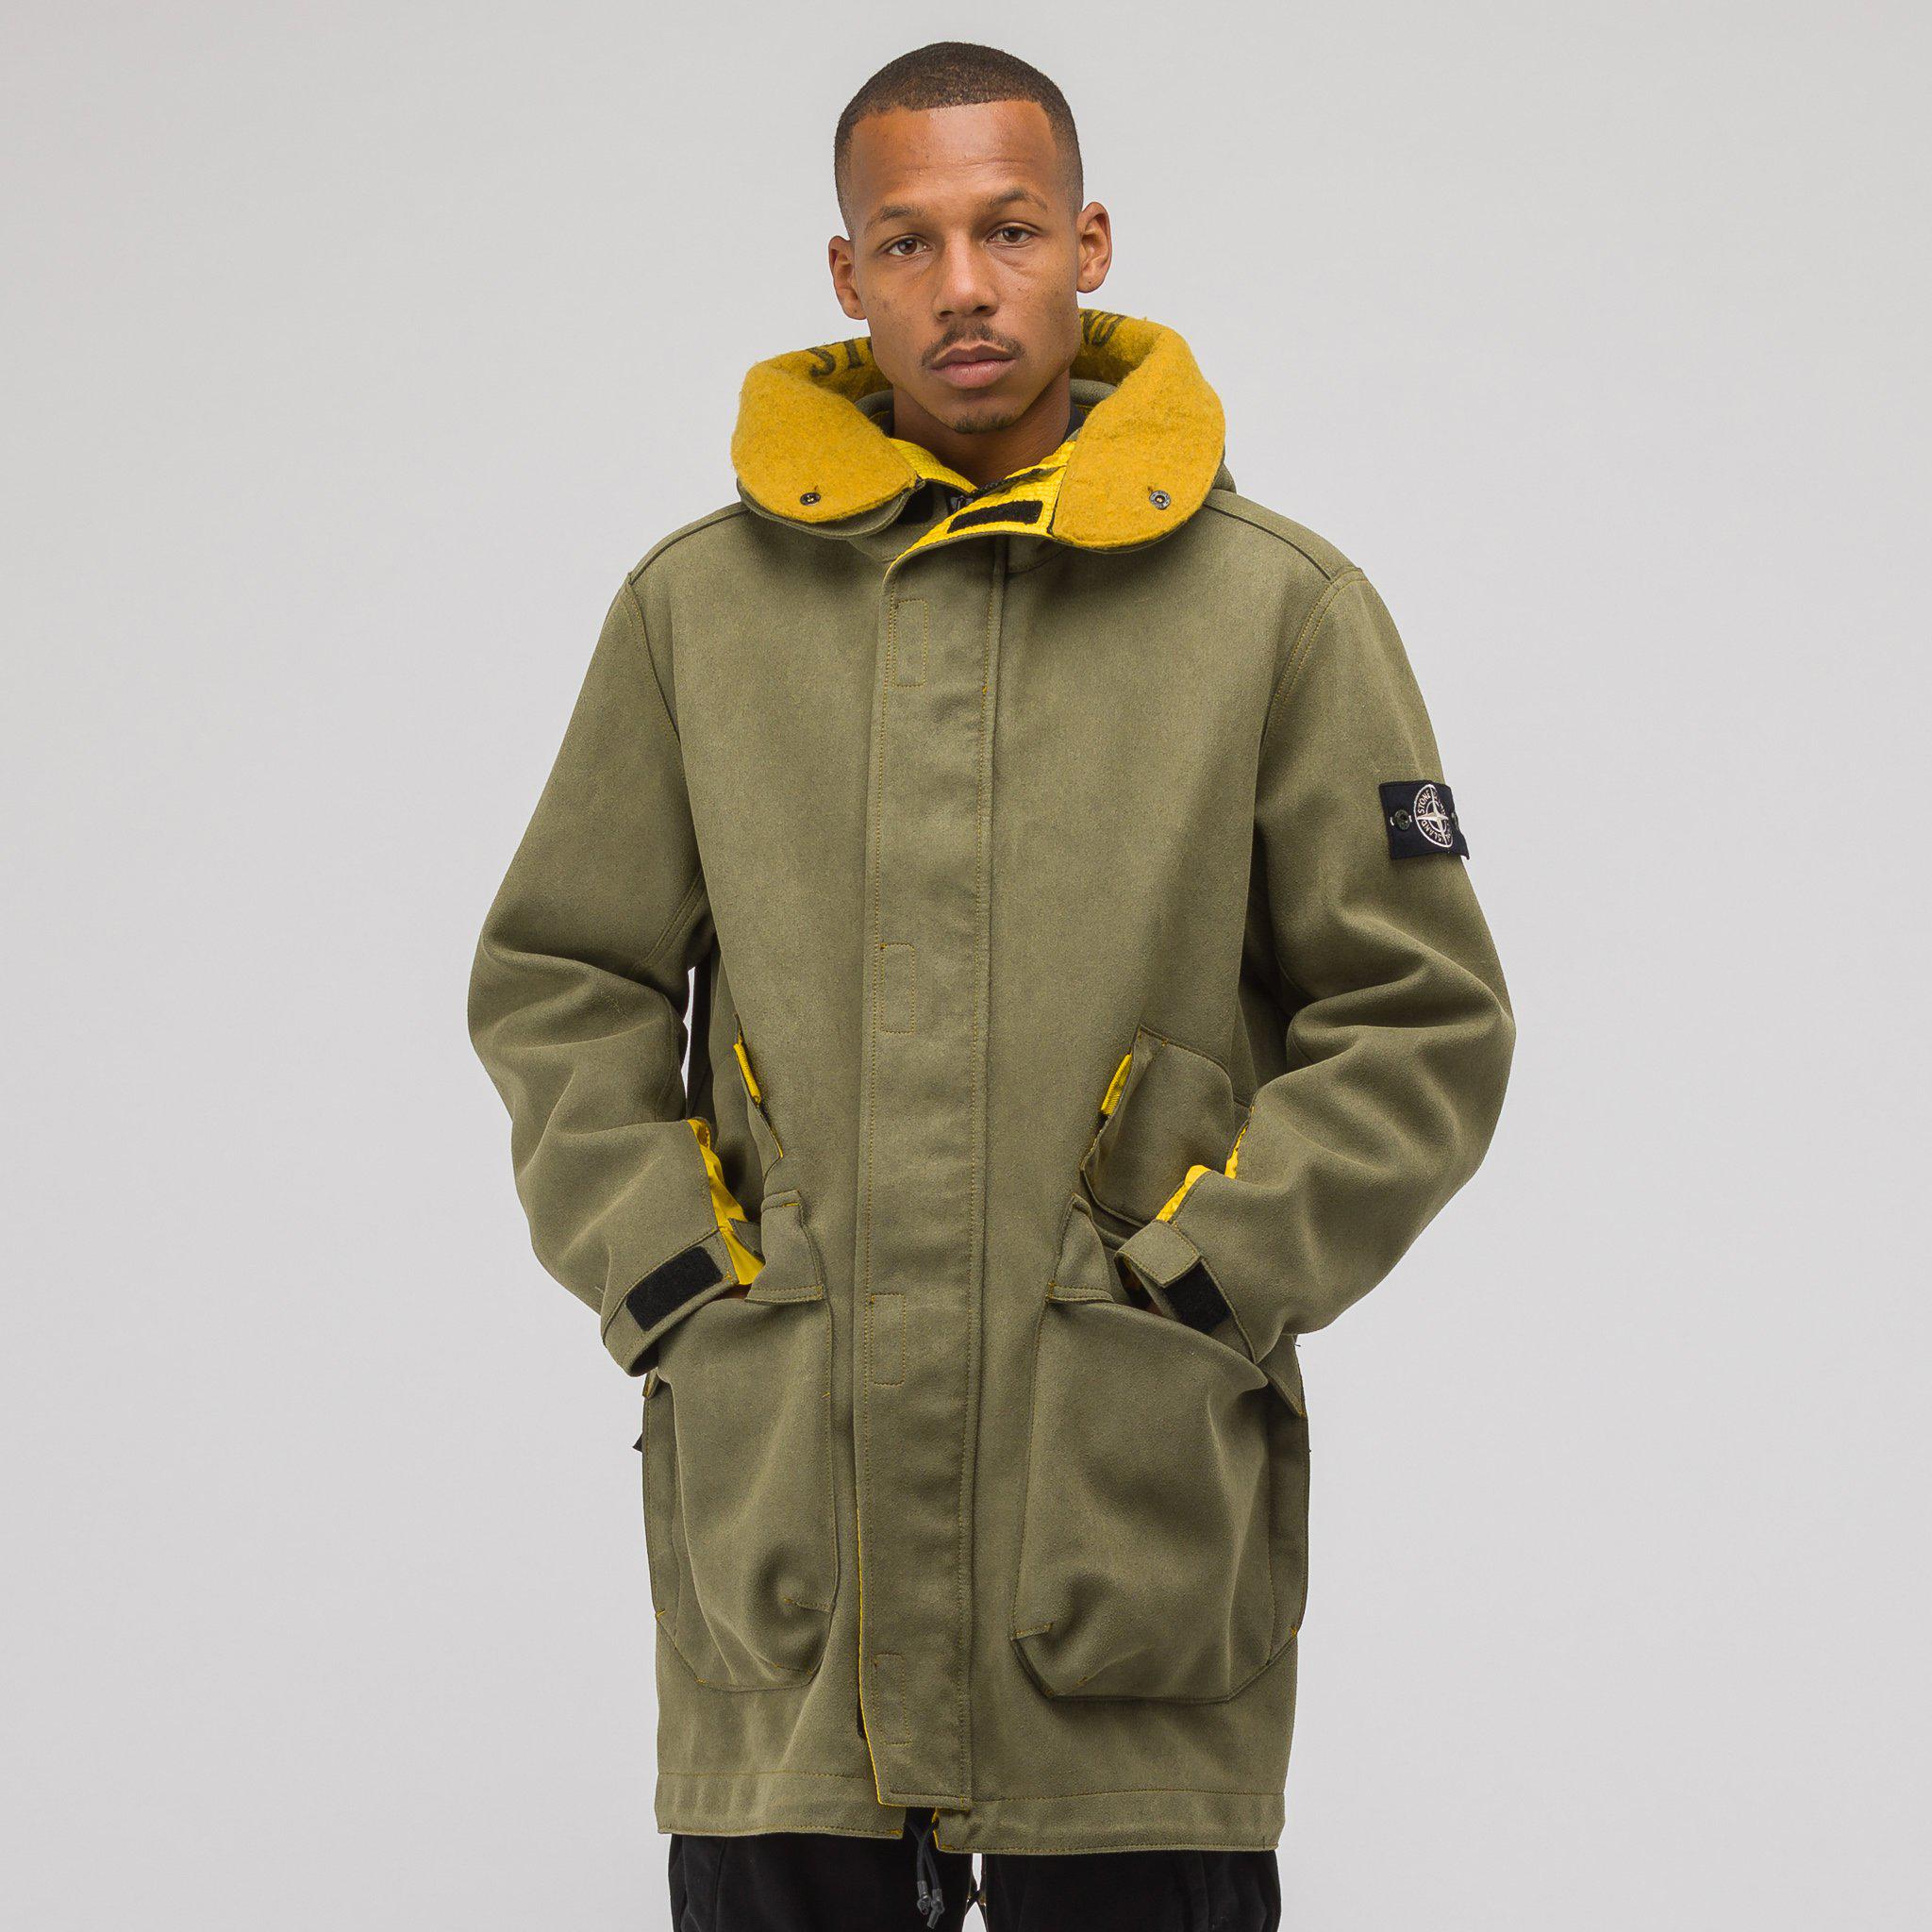 Stone Island 71229 Man Made Suede Coat In Olive in Green for Men - Lyst